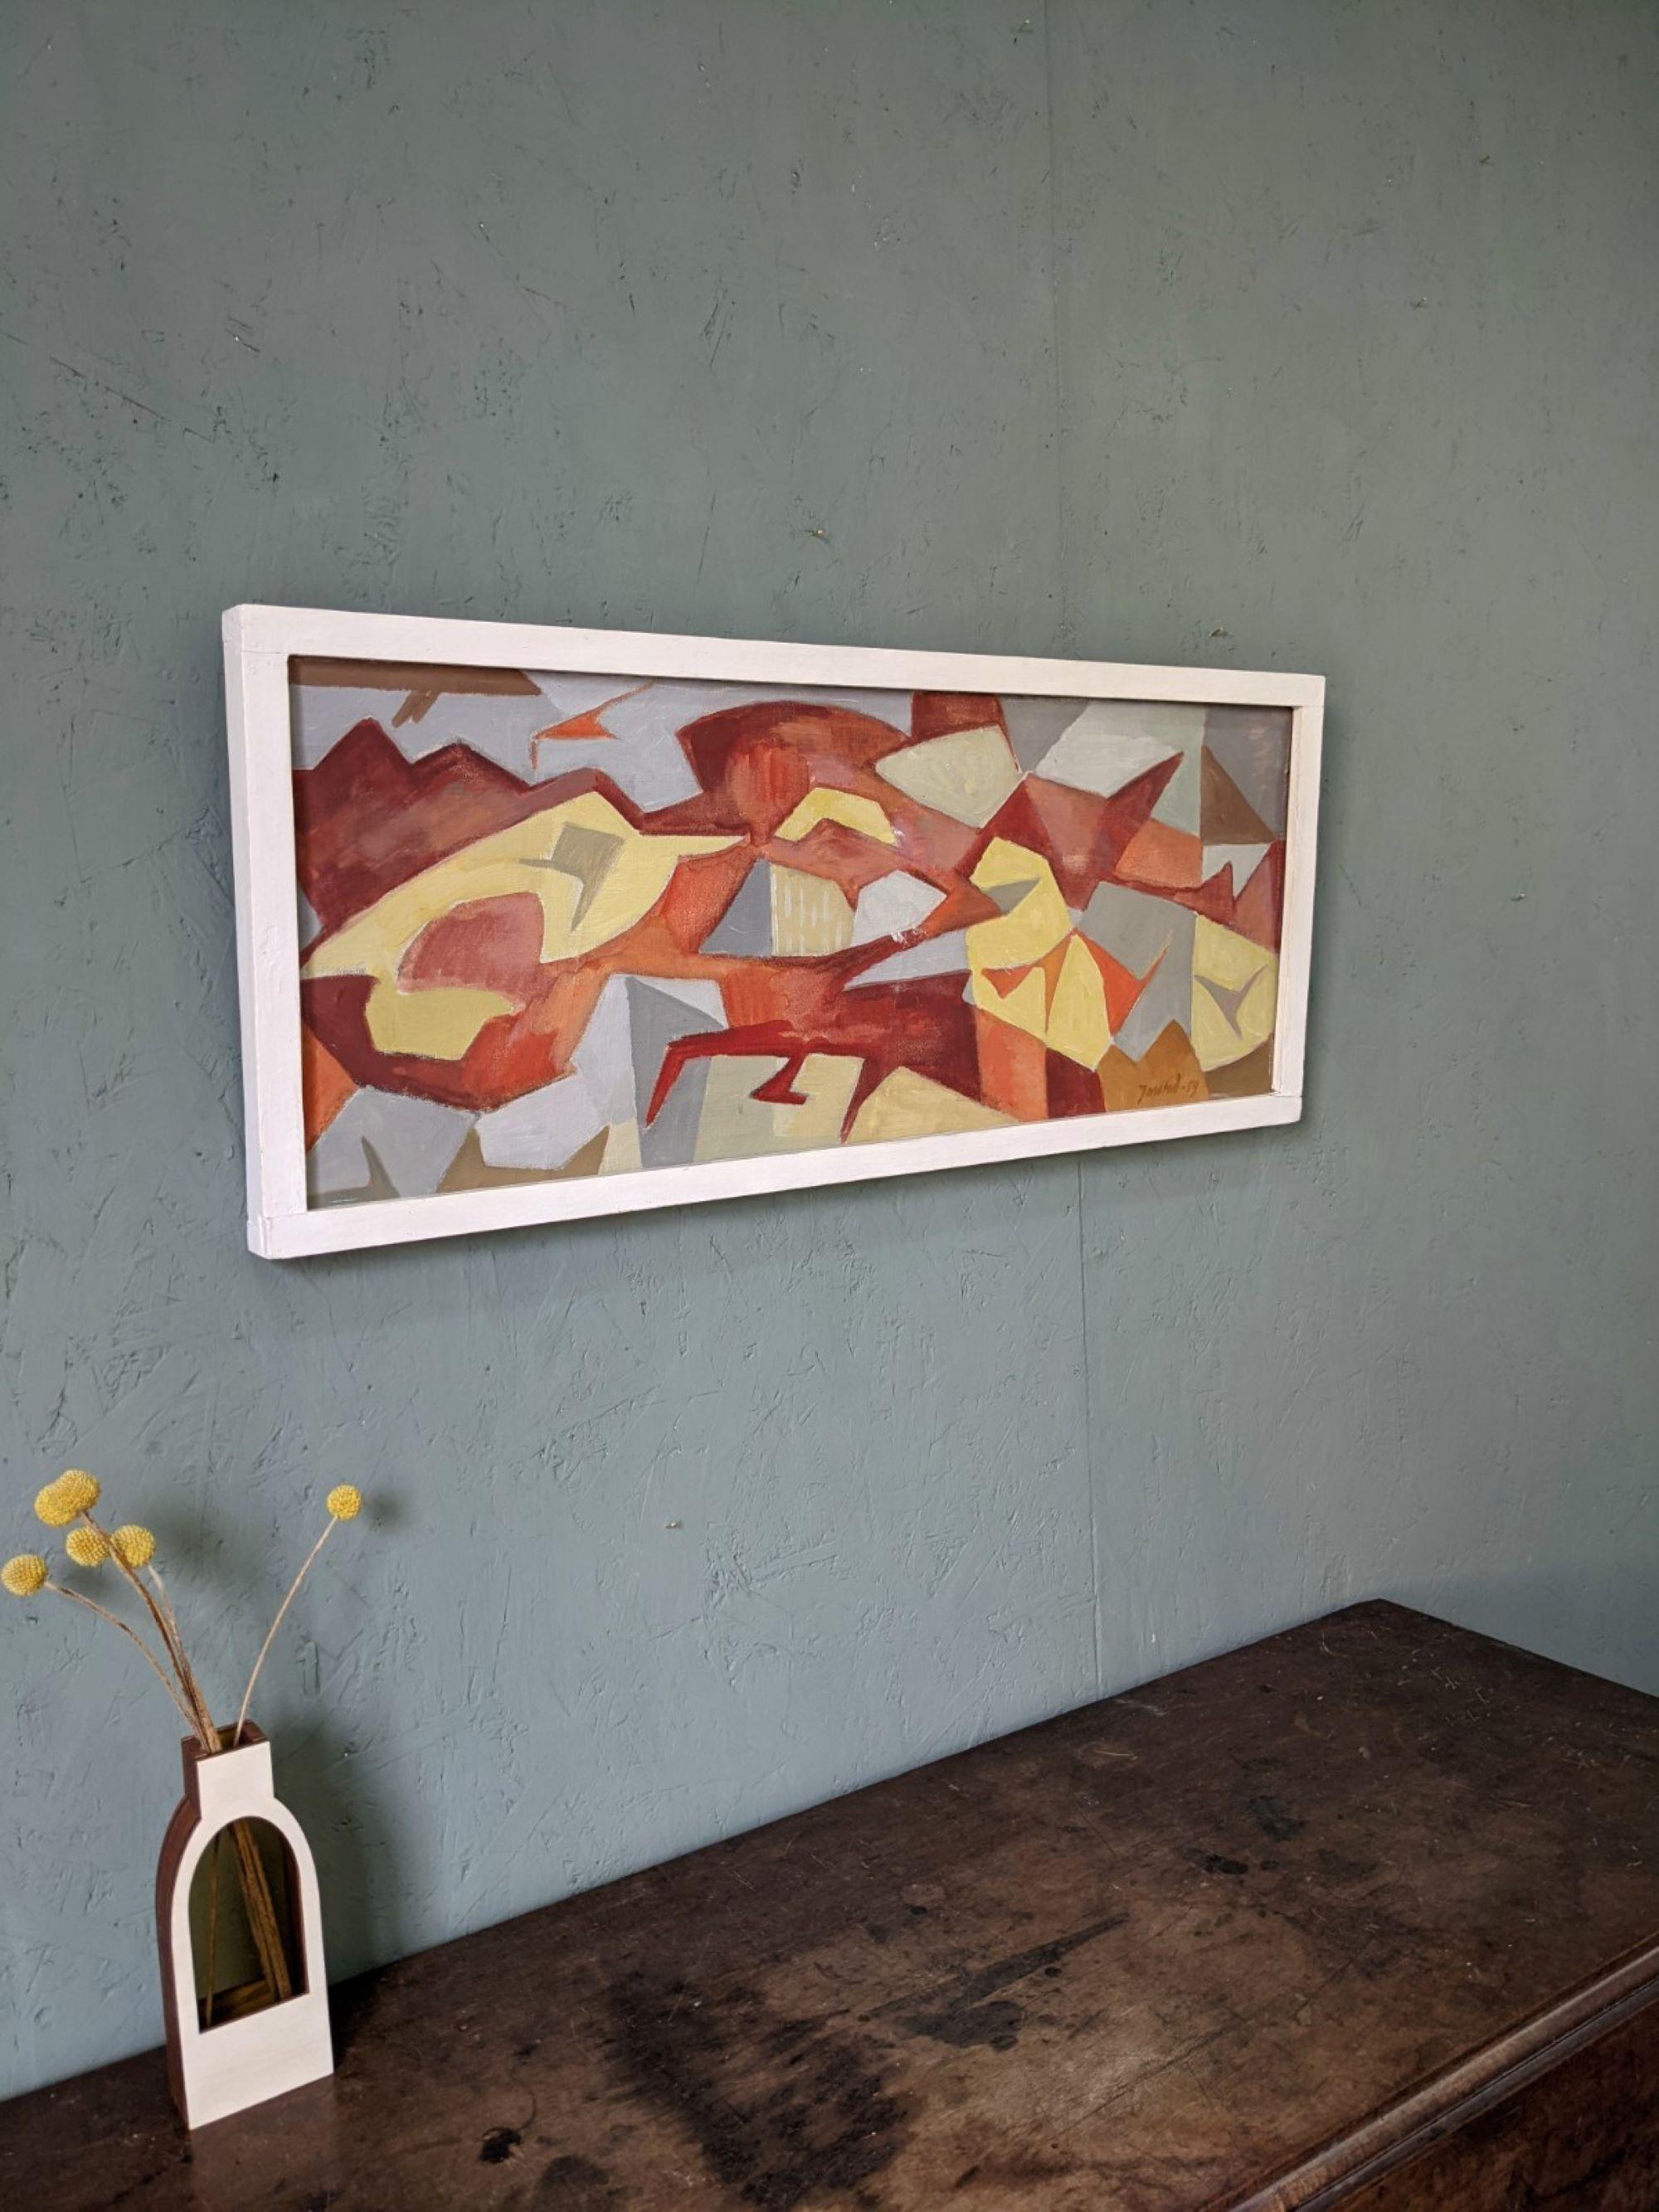 JIGSAW
Size: 32 x 76.5 cm (including frame)
Oil on canvas

A fun and playful abstract composition, executed in oil onto canvas and dated 1959.

The artist has arranged an array of geometric shapes in different colours and sizes onto the canvas,